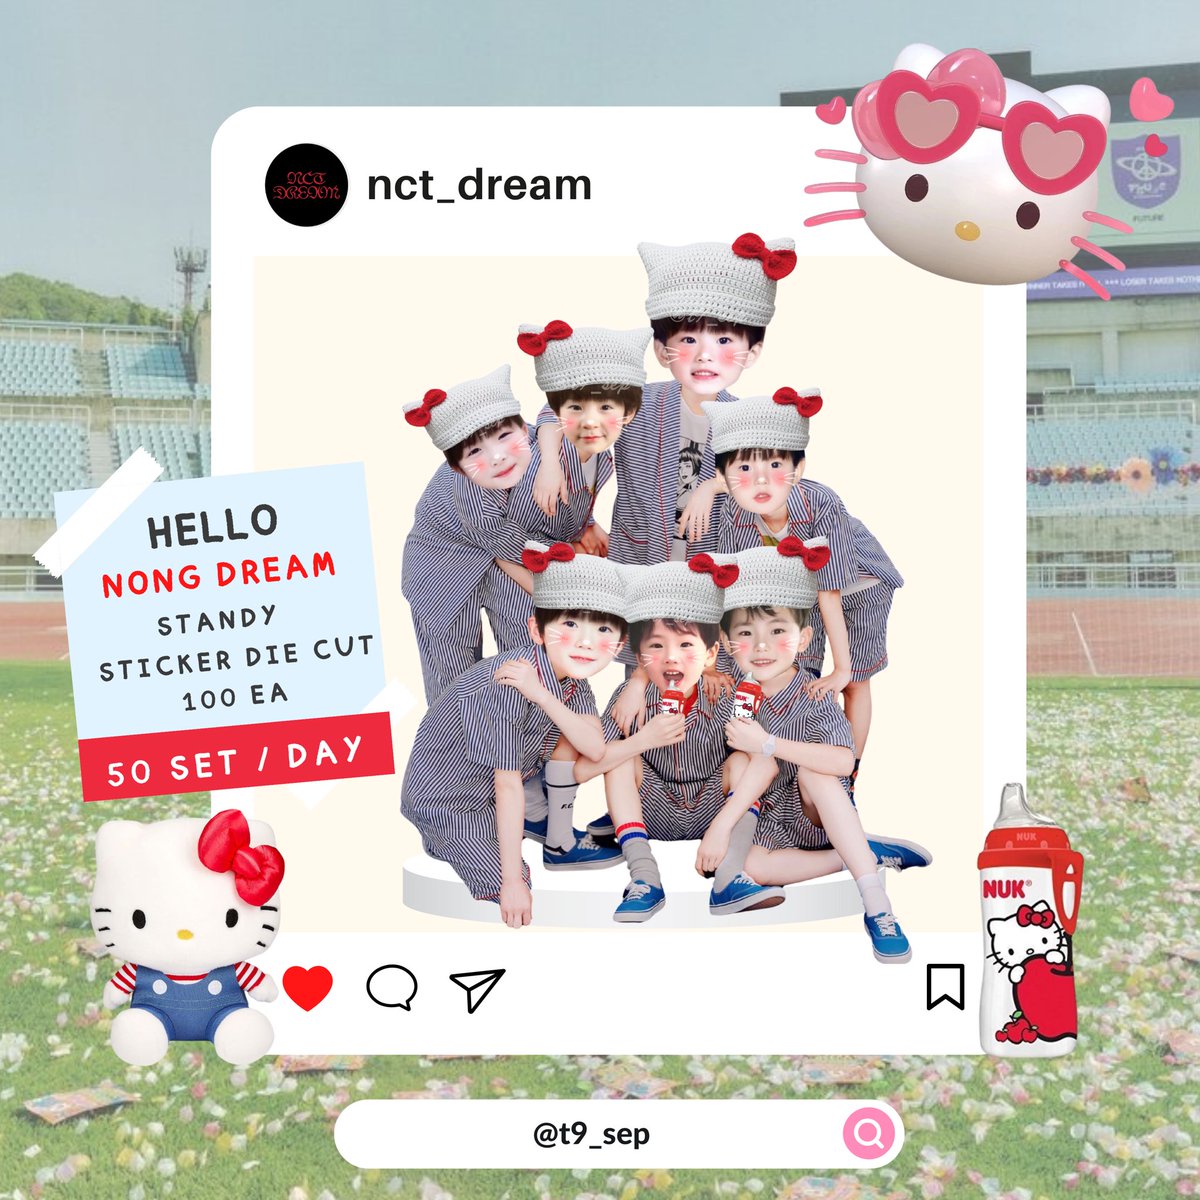 pls kindly rt ︎ ♡⃣giveaway for Dream zen 7dream Date 22-23 june 2024 🩵 7dream 🩵 🛼100 Set ᯓ standy + sticker 50 set / day location : rajamangala time 💬 : tba pls rt & show this tweet & คีพ 7d #NCTDREAM_THEDREAMSHOW3_in_BKK #NCTDREAM_THEDREAMSHOW3inBKK